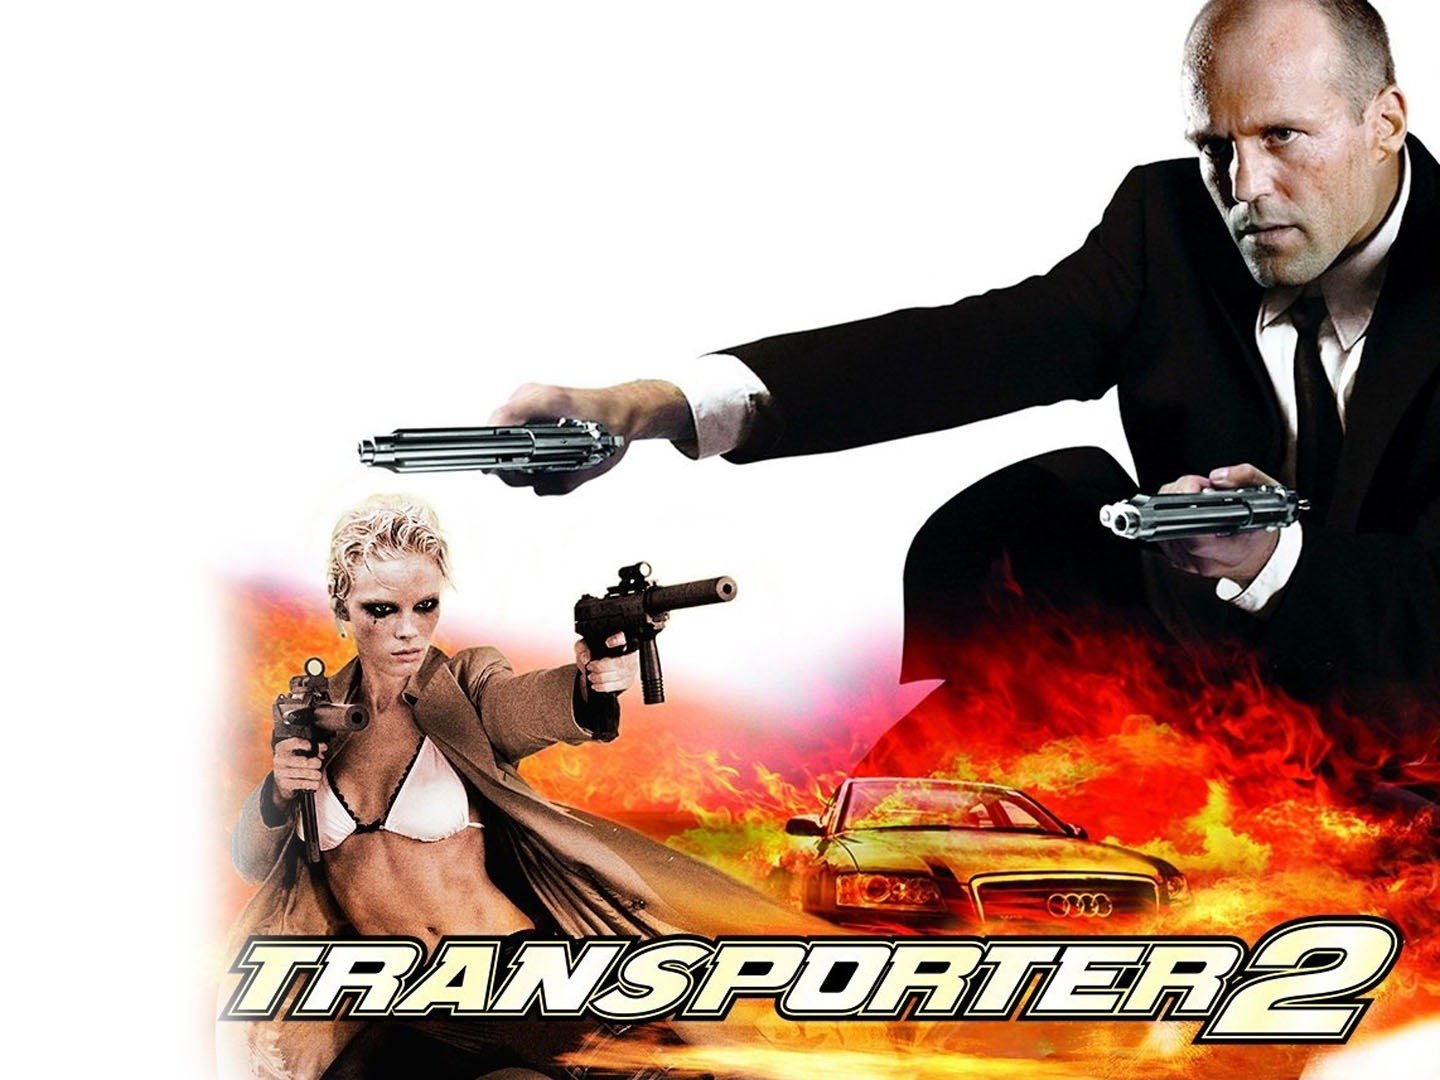 Transporter 2 Trailer 1 Trailers And Videos Rotten Tomatoes